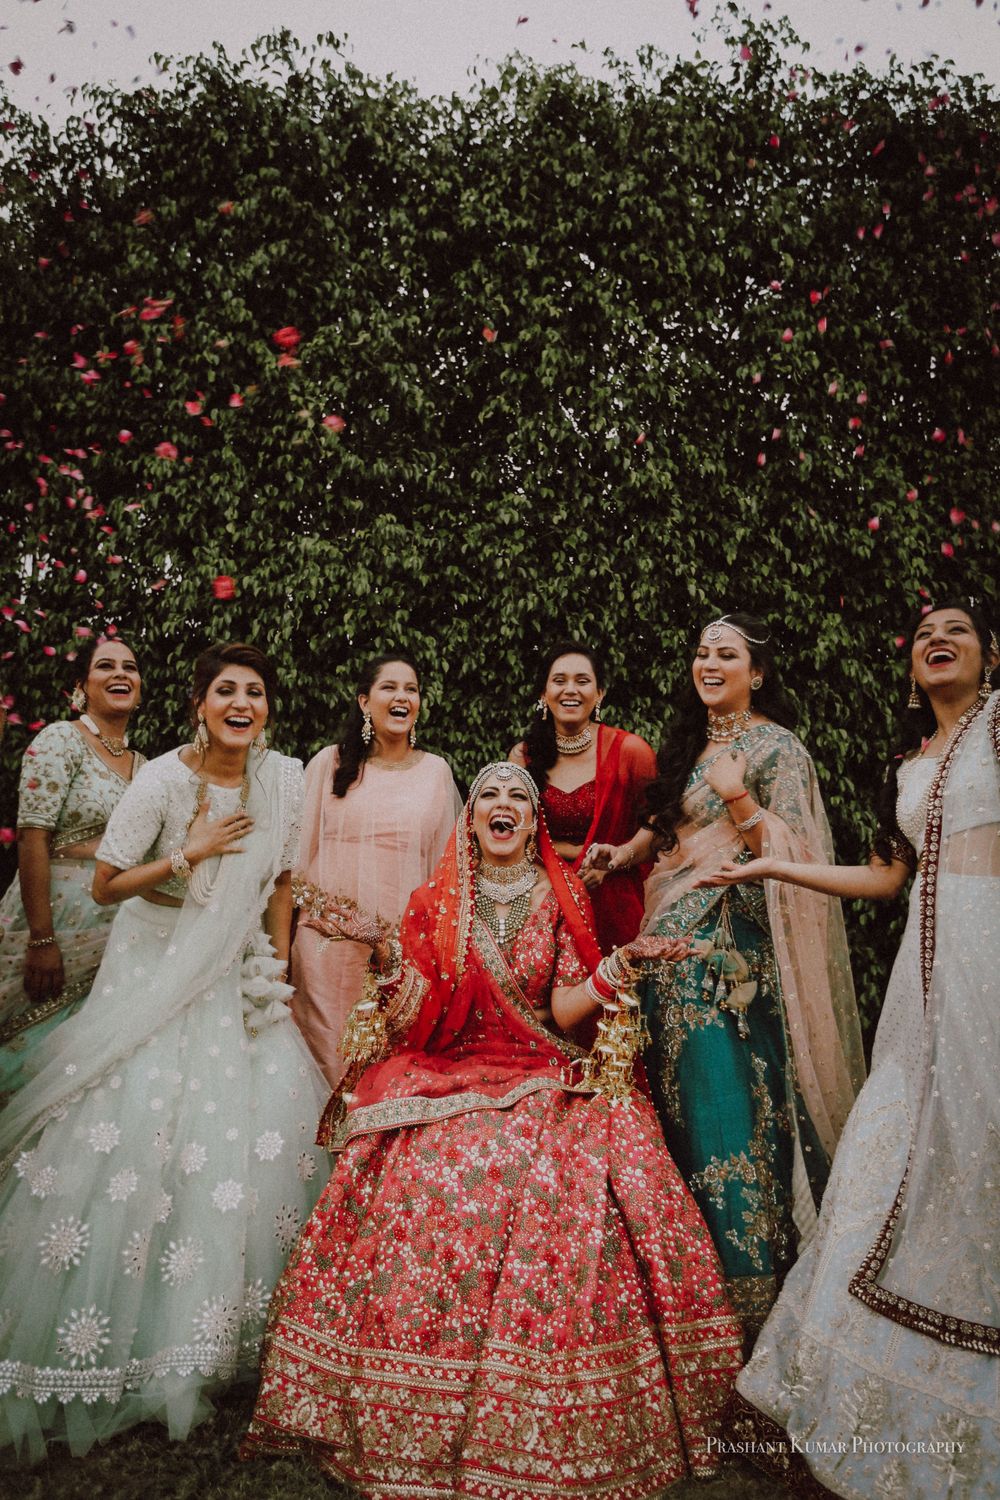 Photo of A bride in a red lehenga laughing with her bridesmaids on her wedding day